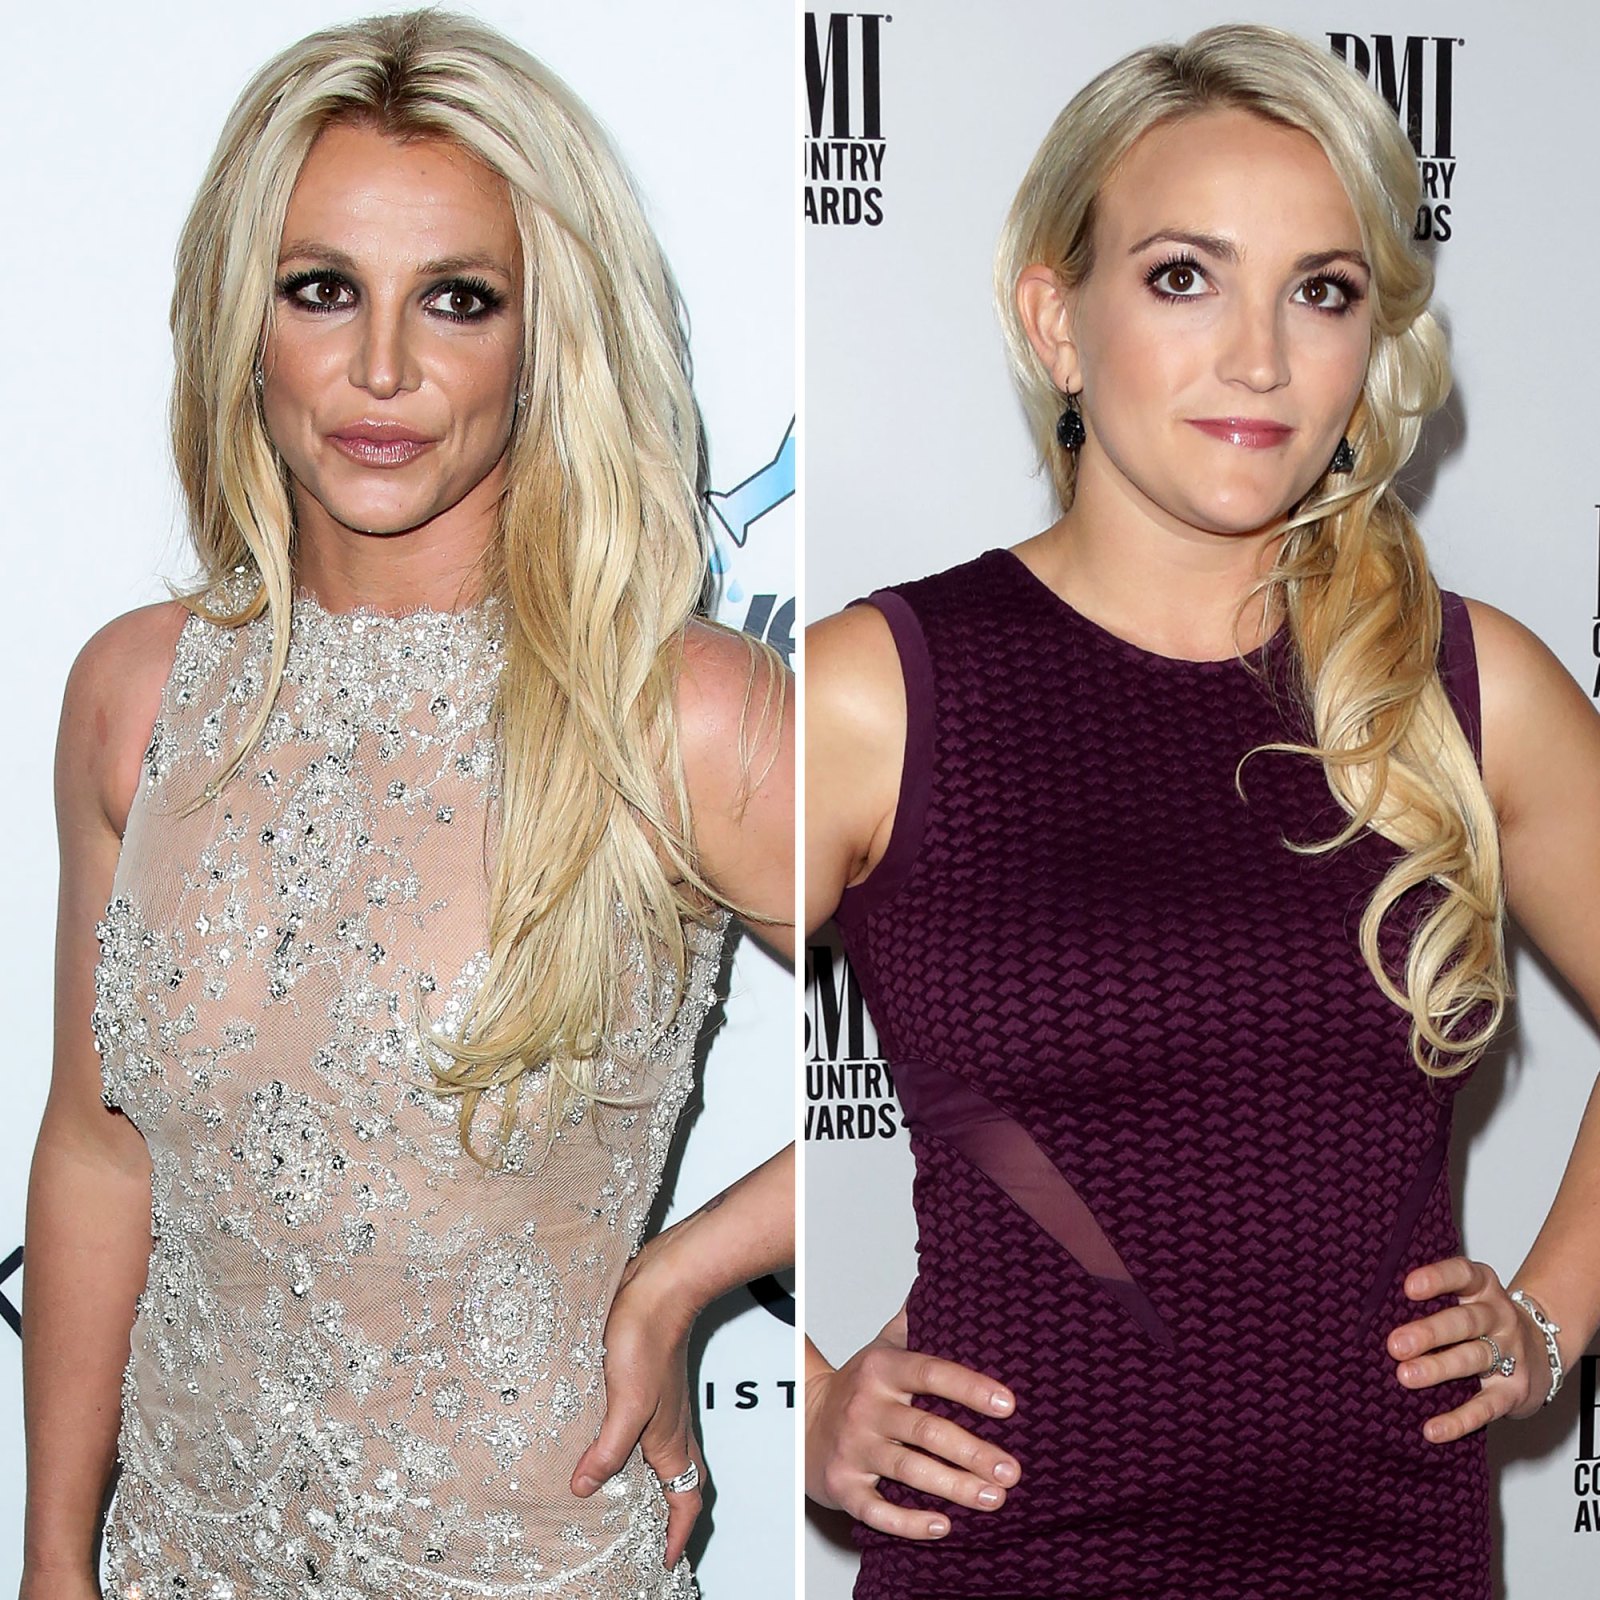 Britney Slams Jamie Lynn's 'Ill-Timed' Book, Interviews in Cease and Desist